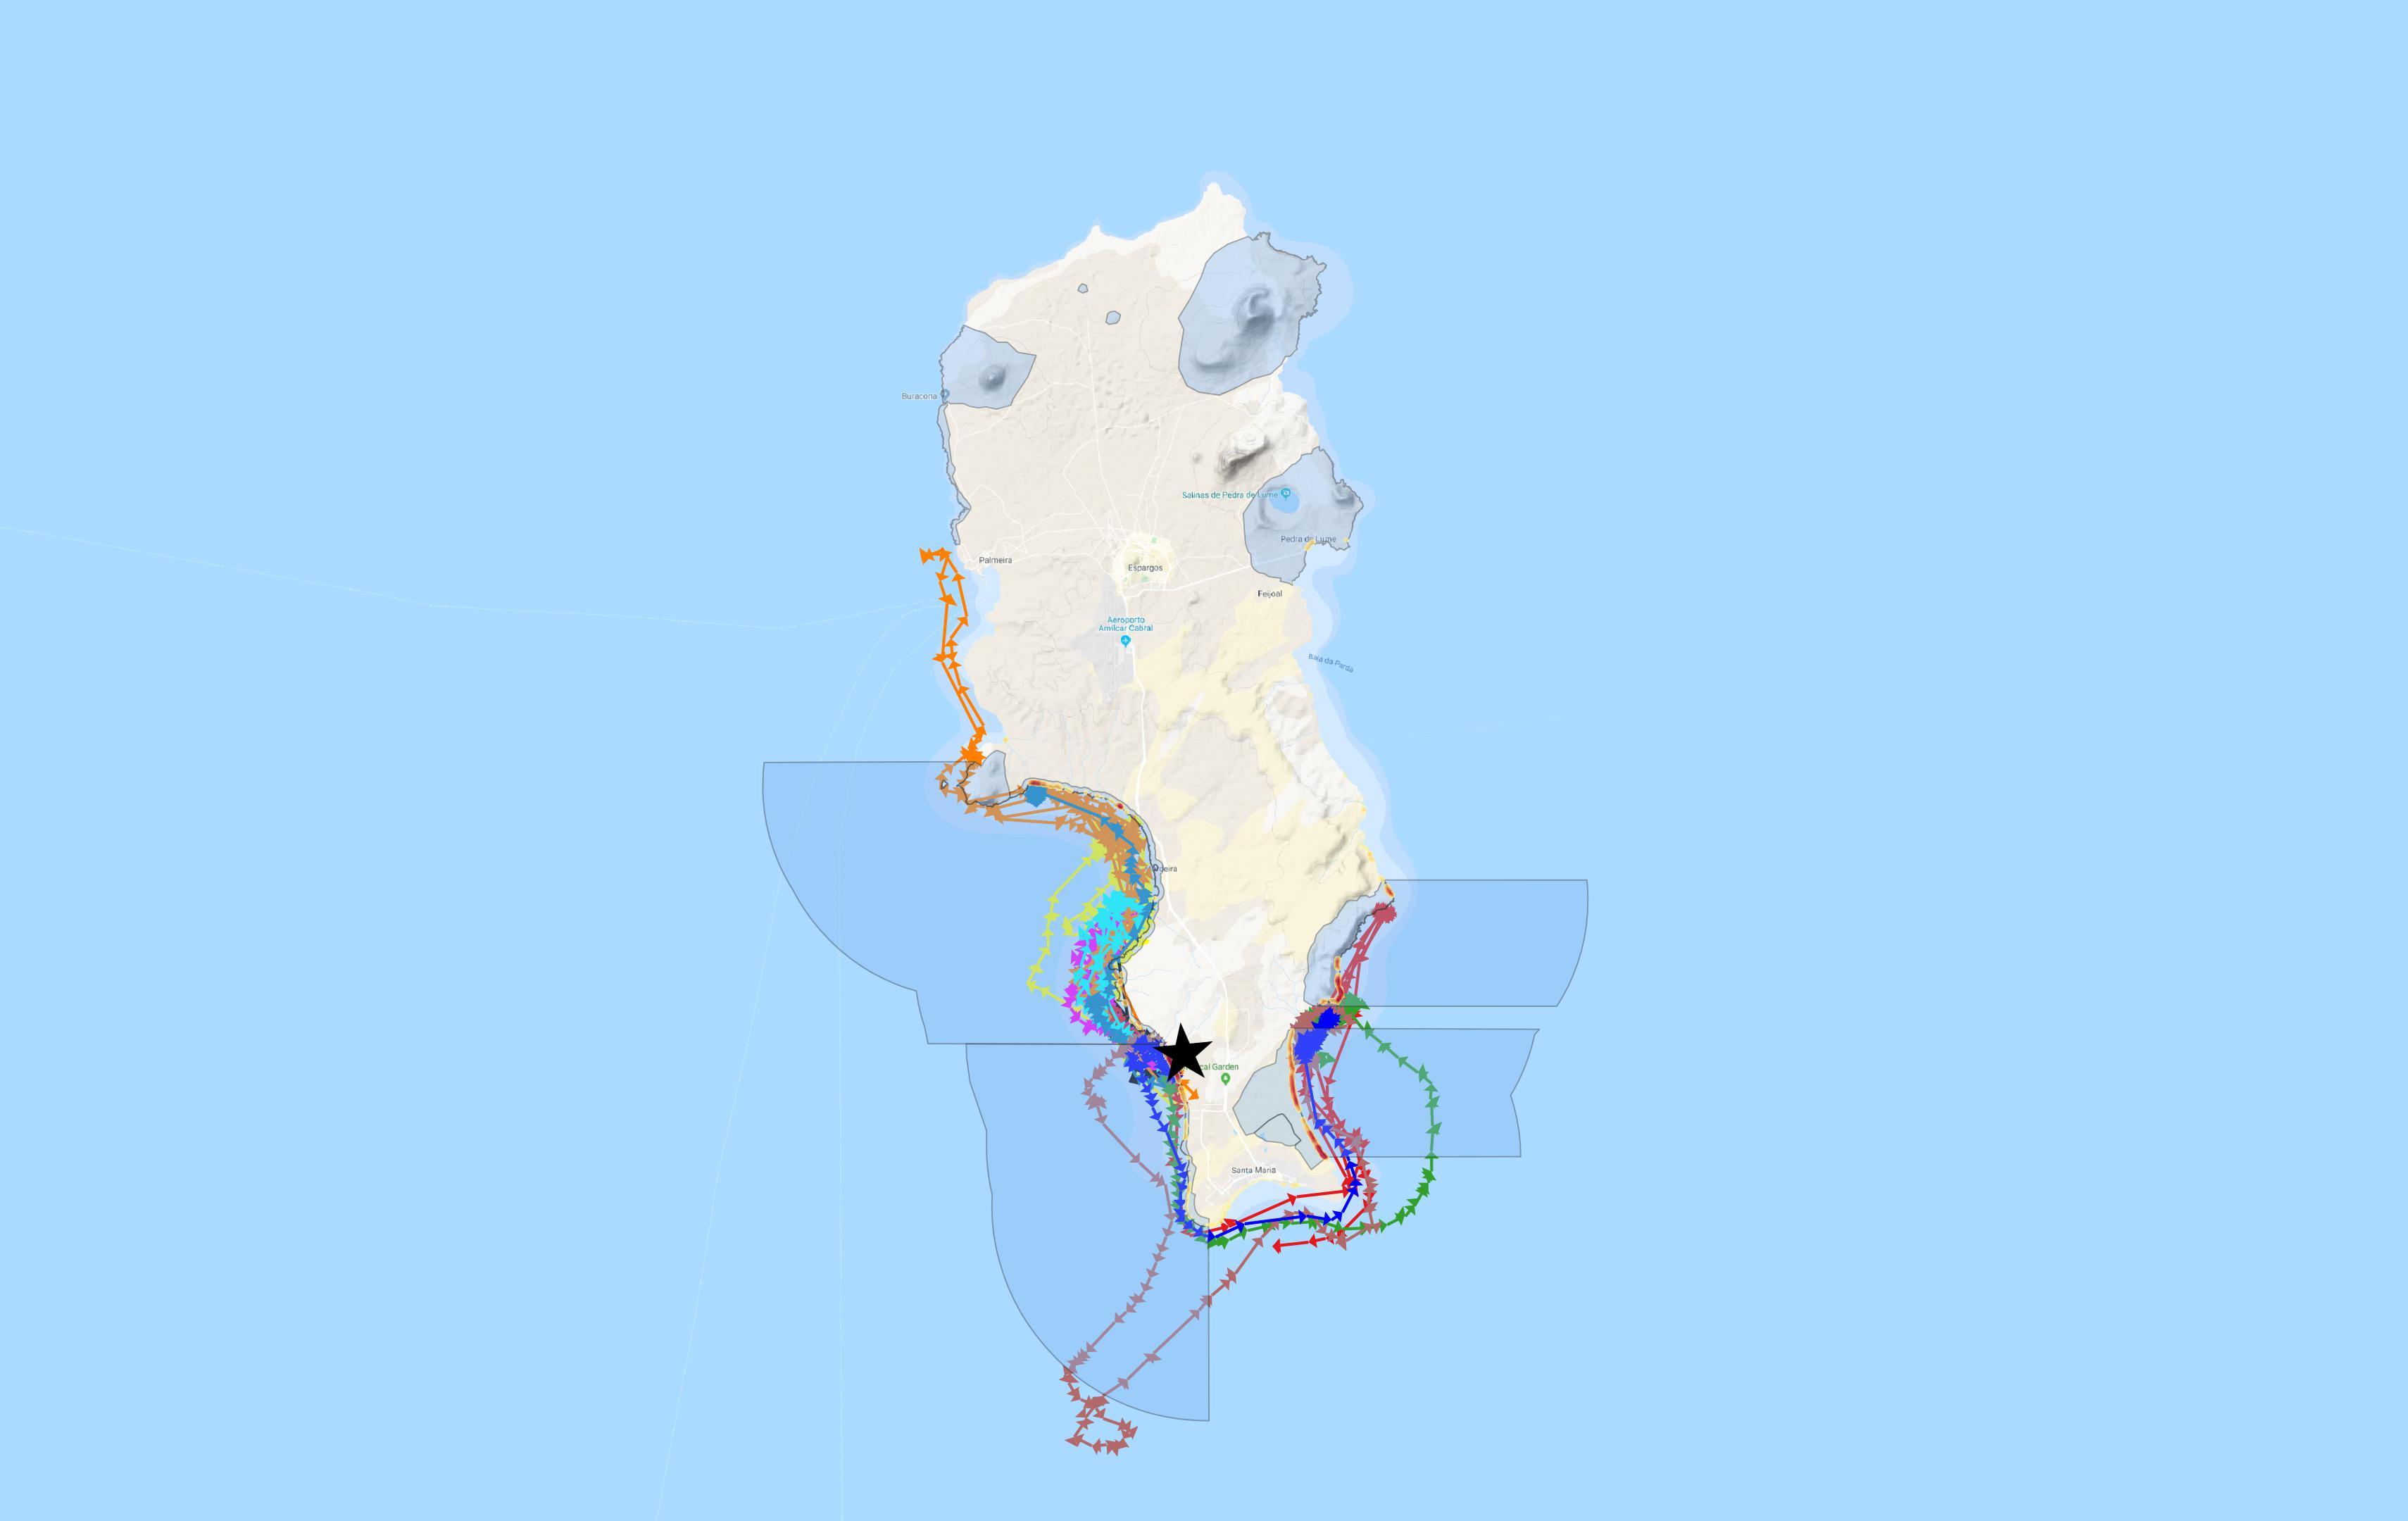 Map of Sal Island with GSM-relayed devices tracks from female loggerhead turtles. The black star marks the beach where the devices were deployed. Darker blue areas are Marine Protected Areas. Lines with arrows are the tracks, each colour represents a different turtle. 